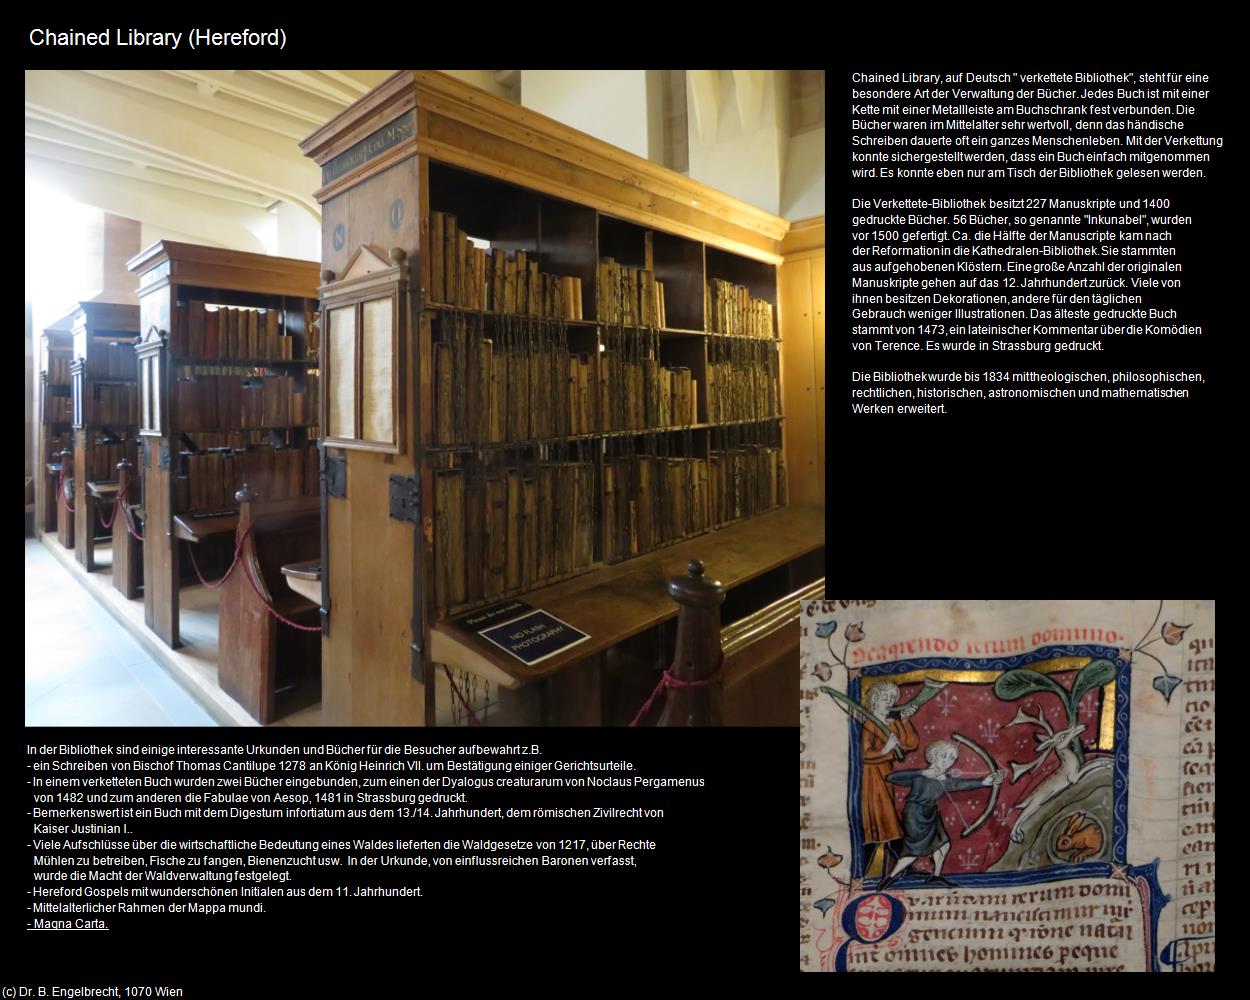 Chained Library (Hereford, England) in Kulturatlas-ENGLAND und WALES(c)B.Engelbrecht